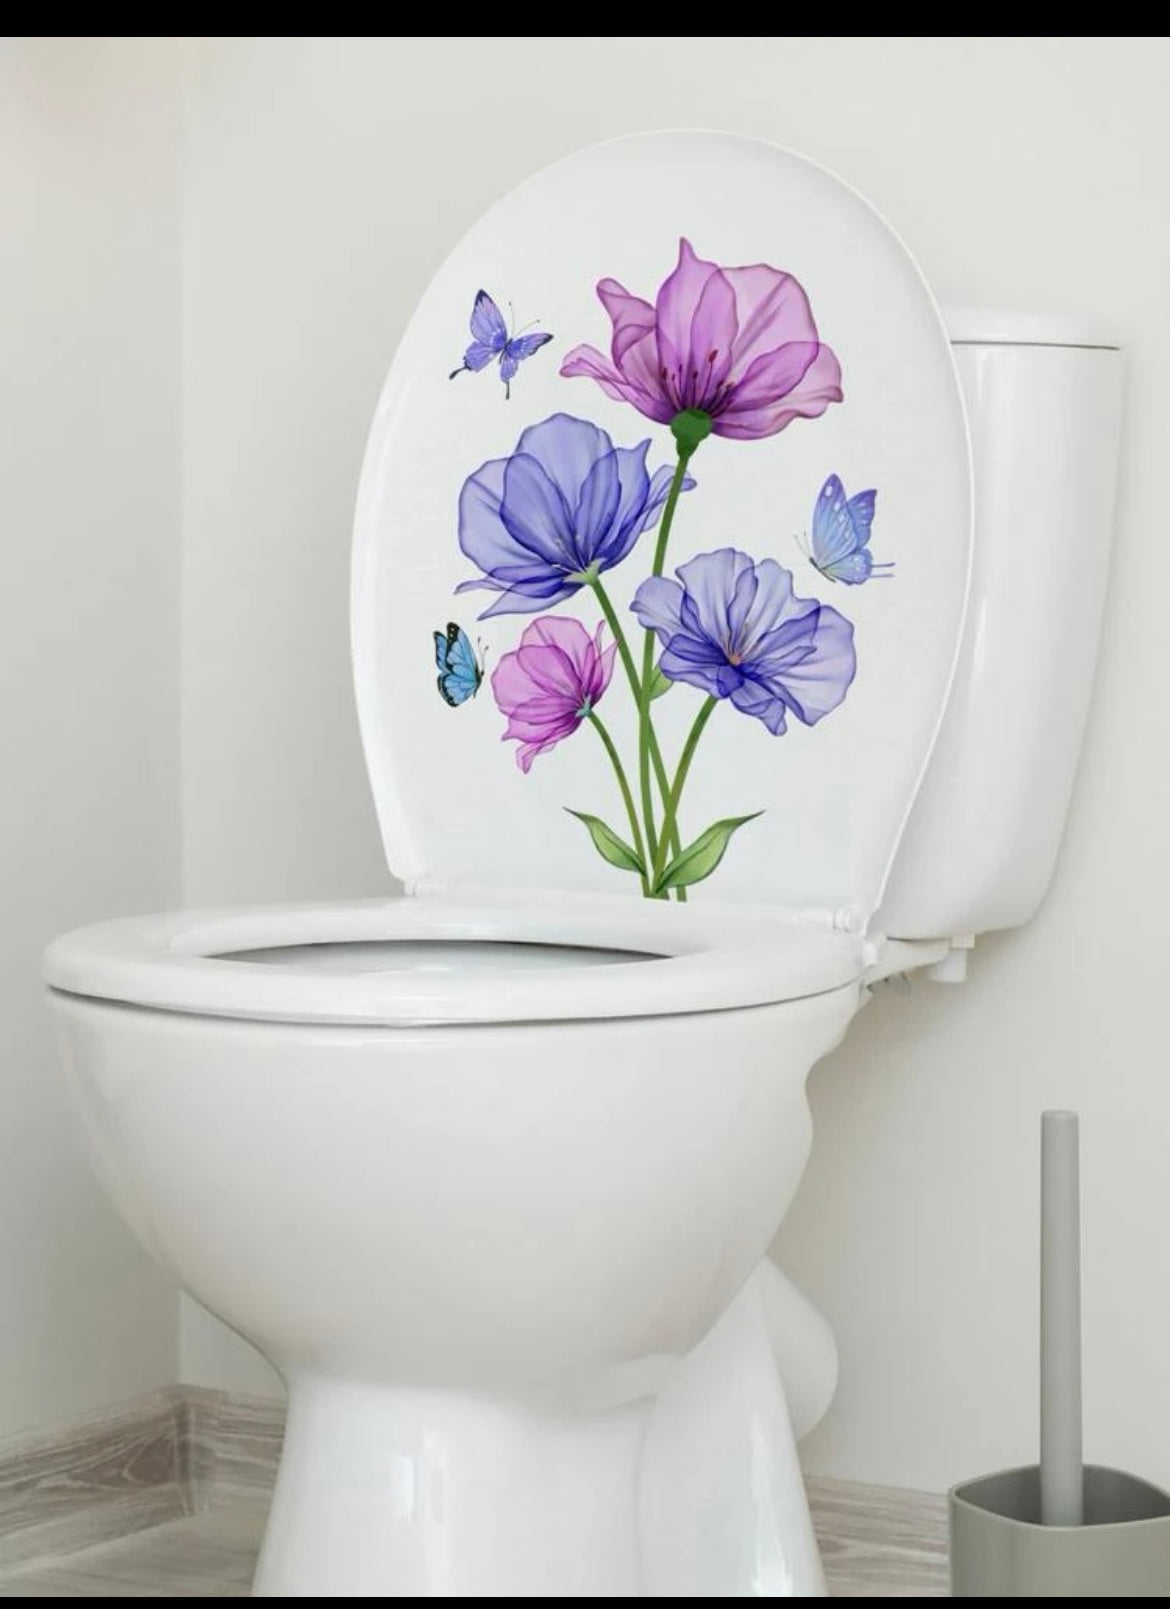 butterfly & floral pattern toilet lid decal